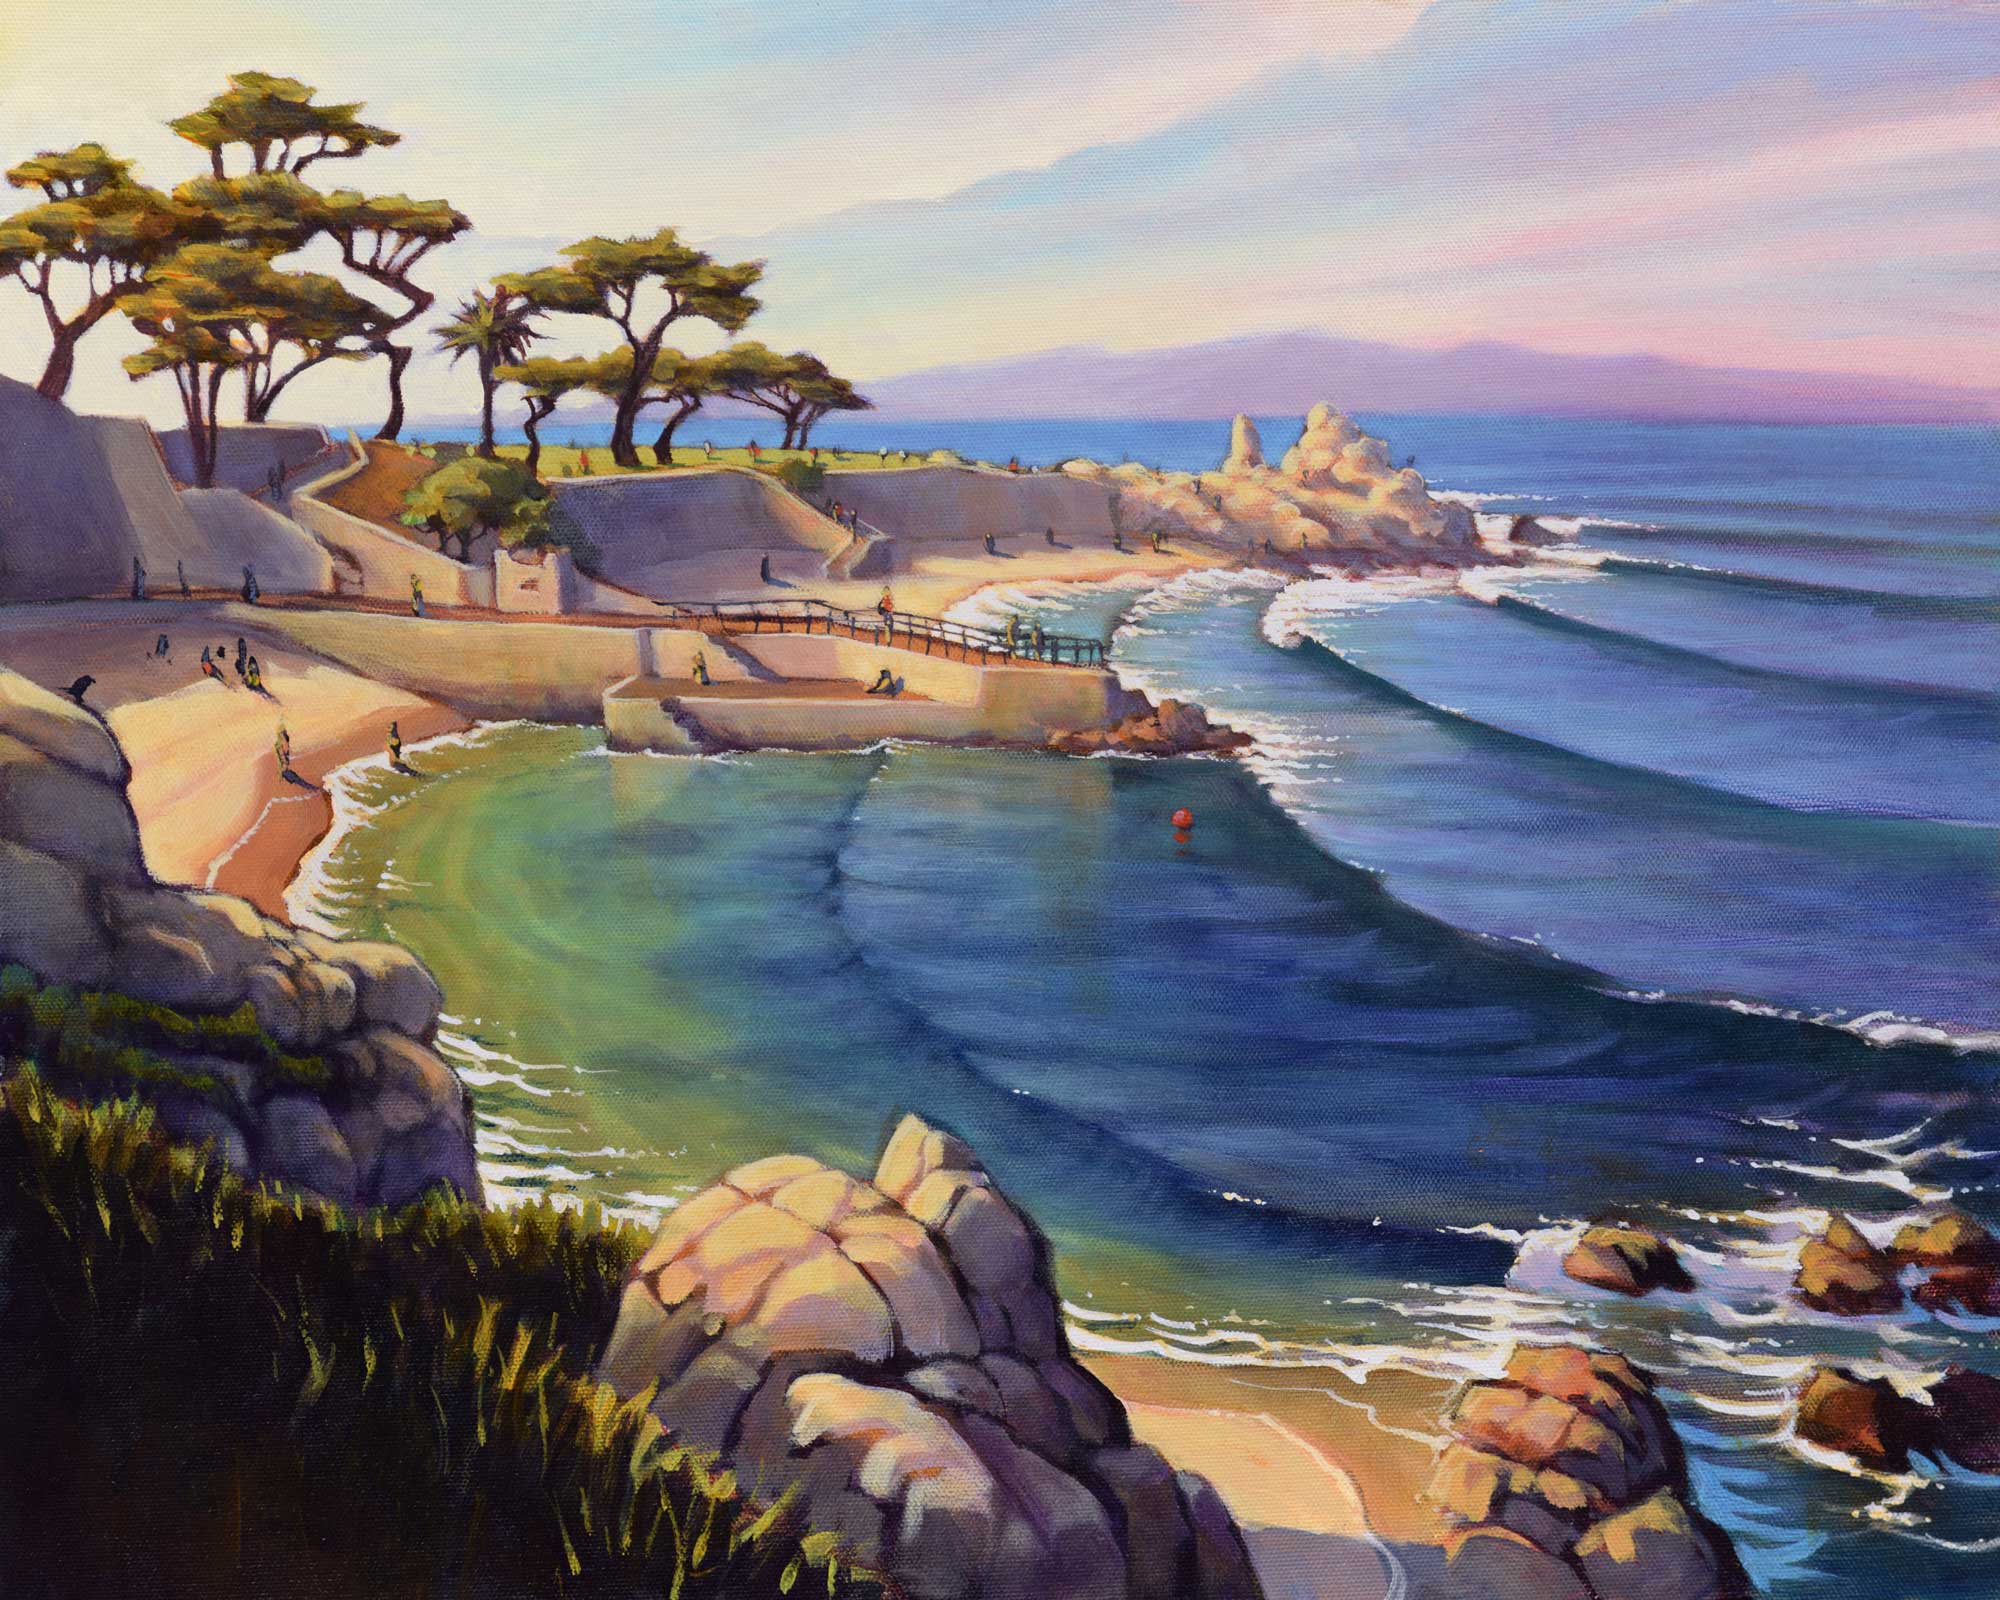 A plein air landscape painting of Lover's Point near Pacific Grove on the Monterey County coast of California